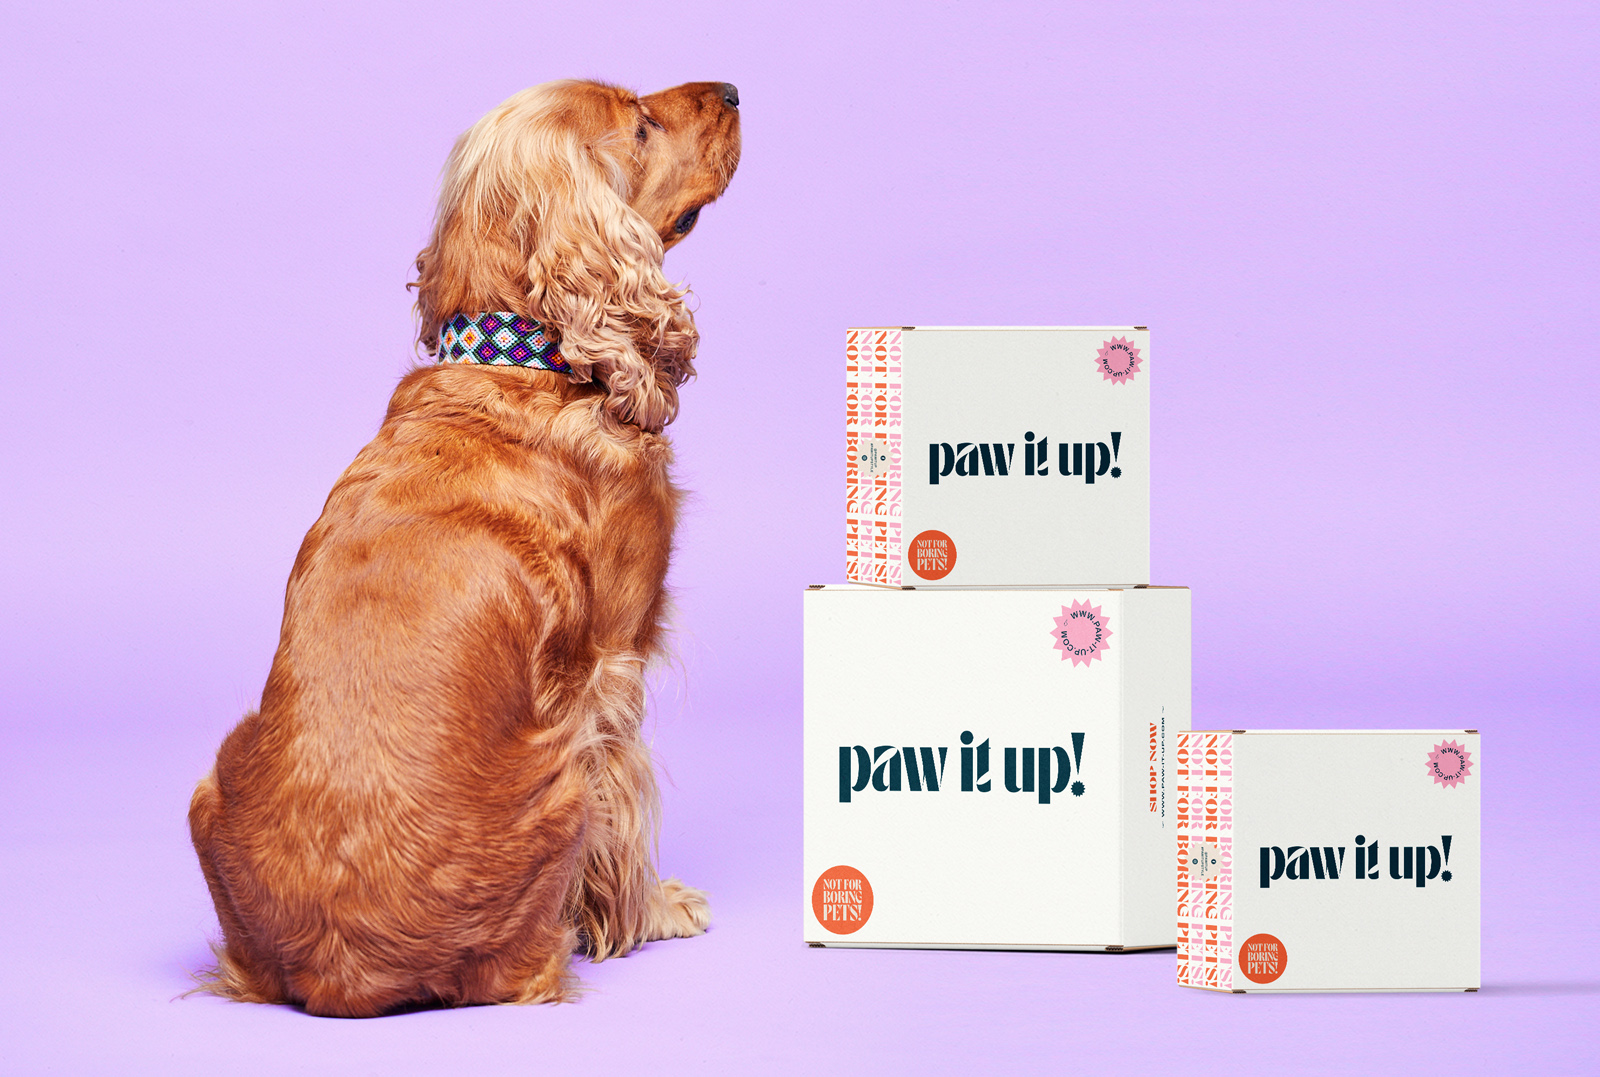 Paw It Up! Packaging